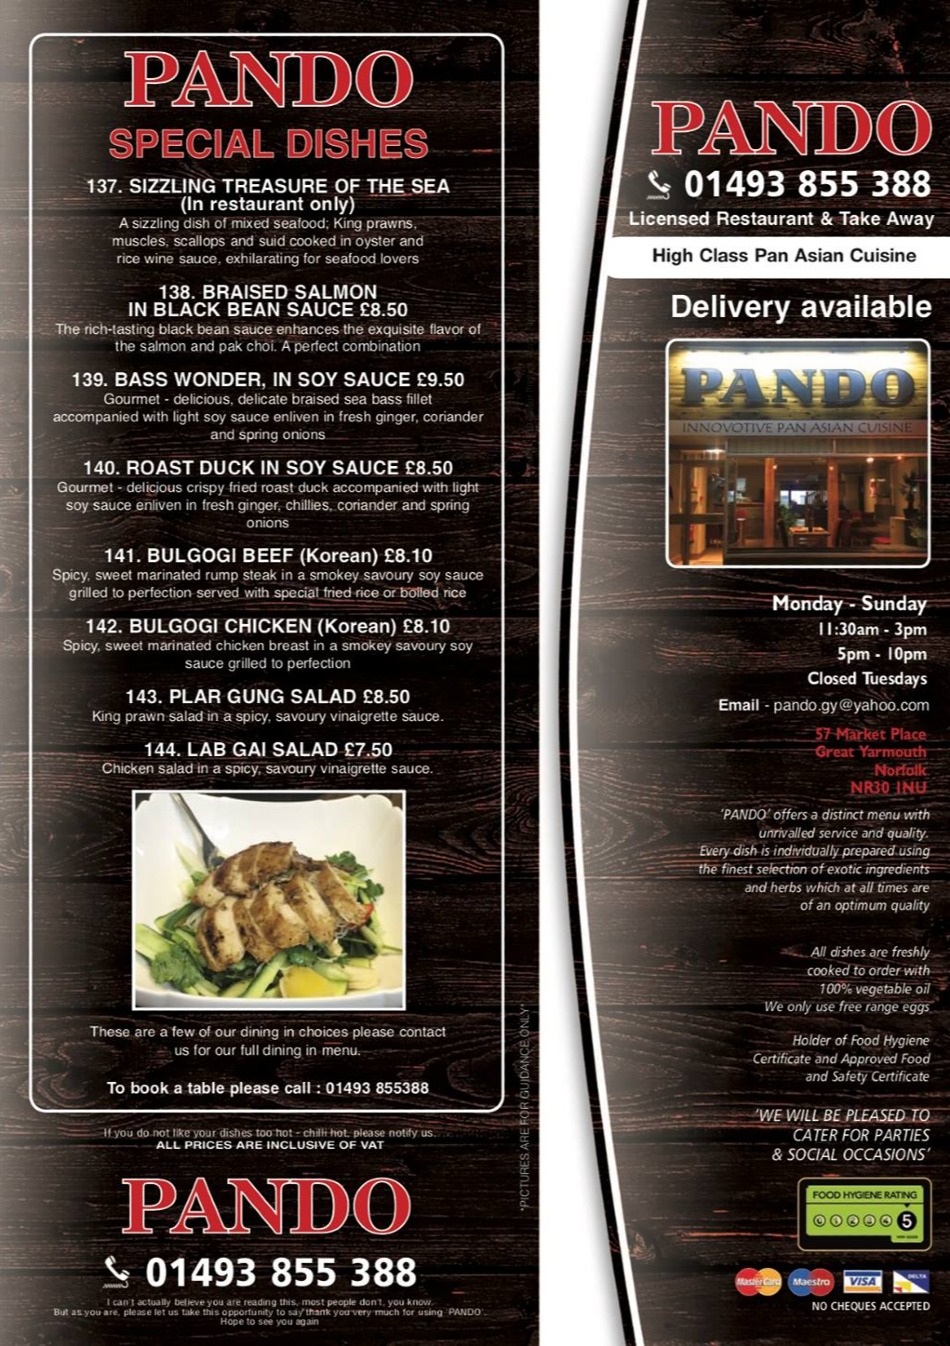 Takeaway Restaurant Menu Page - Pando Thai, Chinese and Pan Asian cuisine - Great Yarmouth